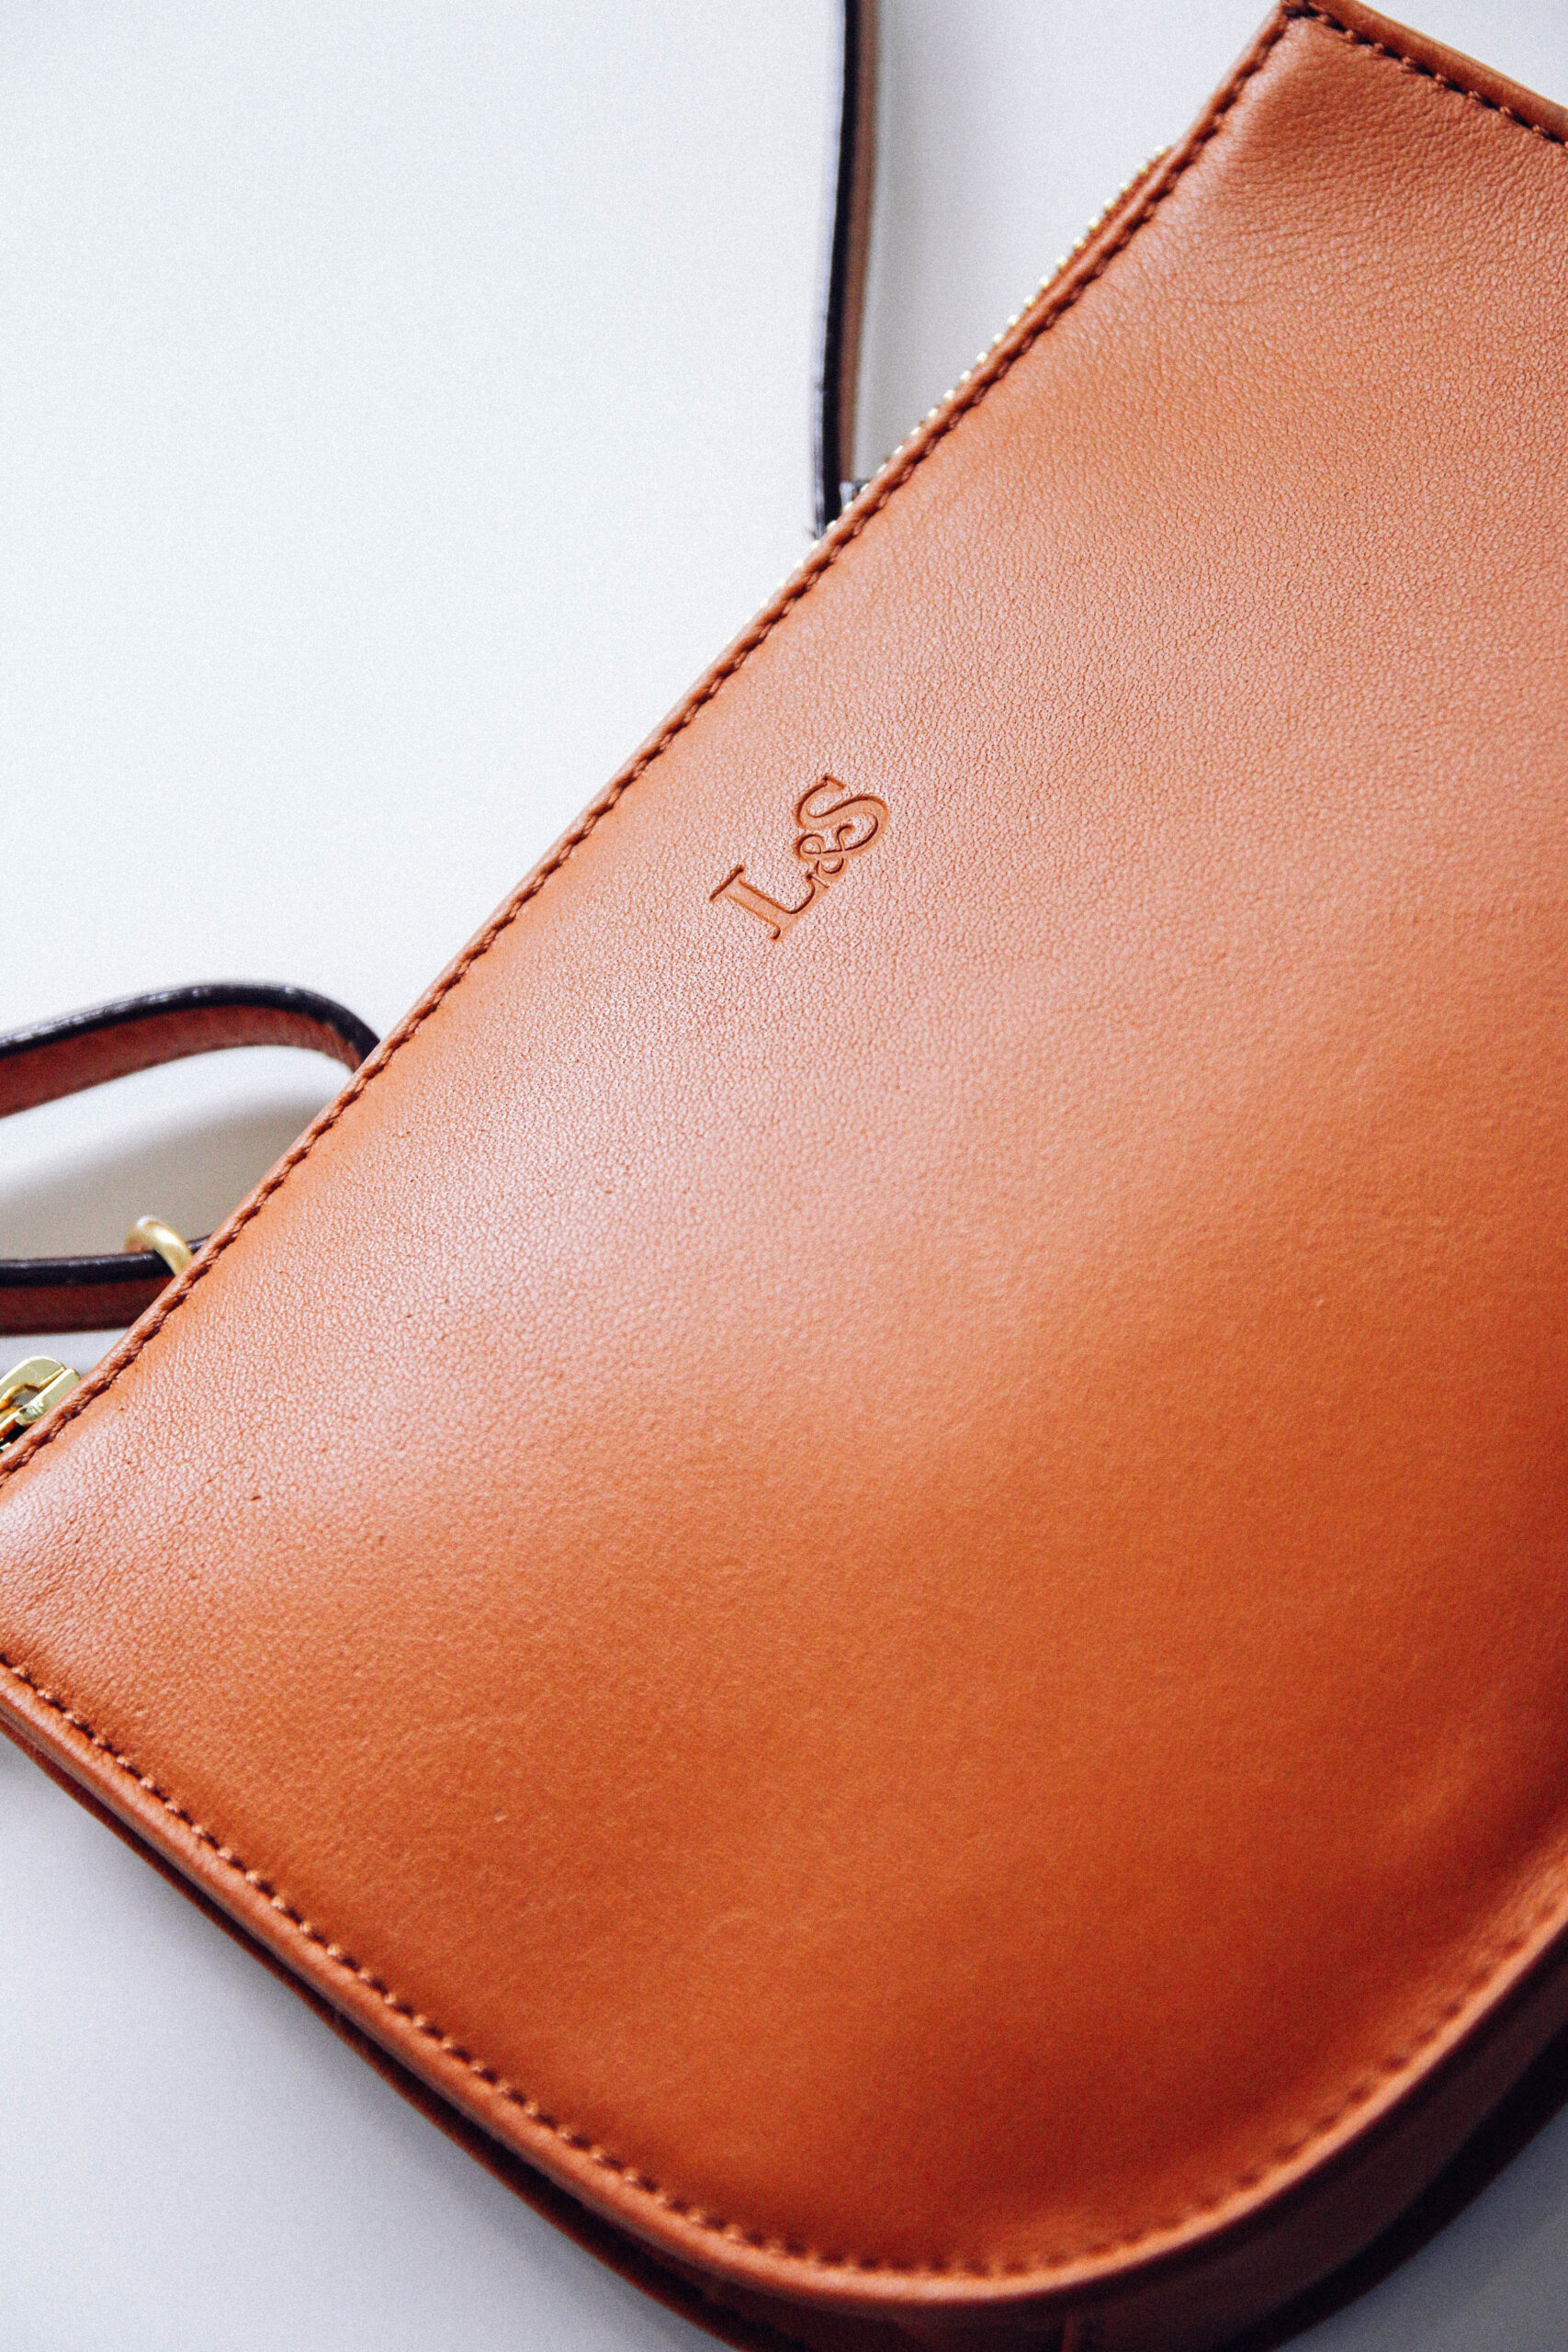 Lo & Sons - The Waverley's adjustable strap allows the bag